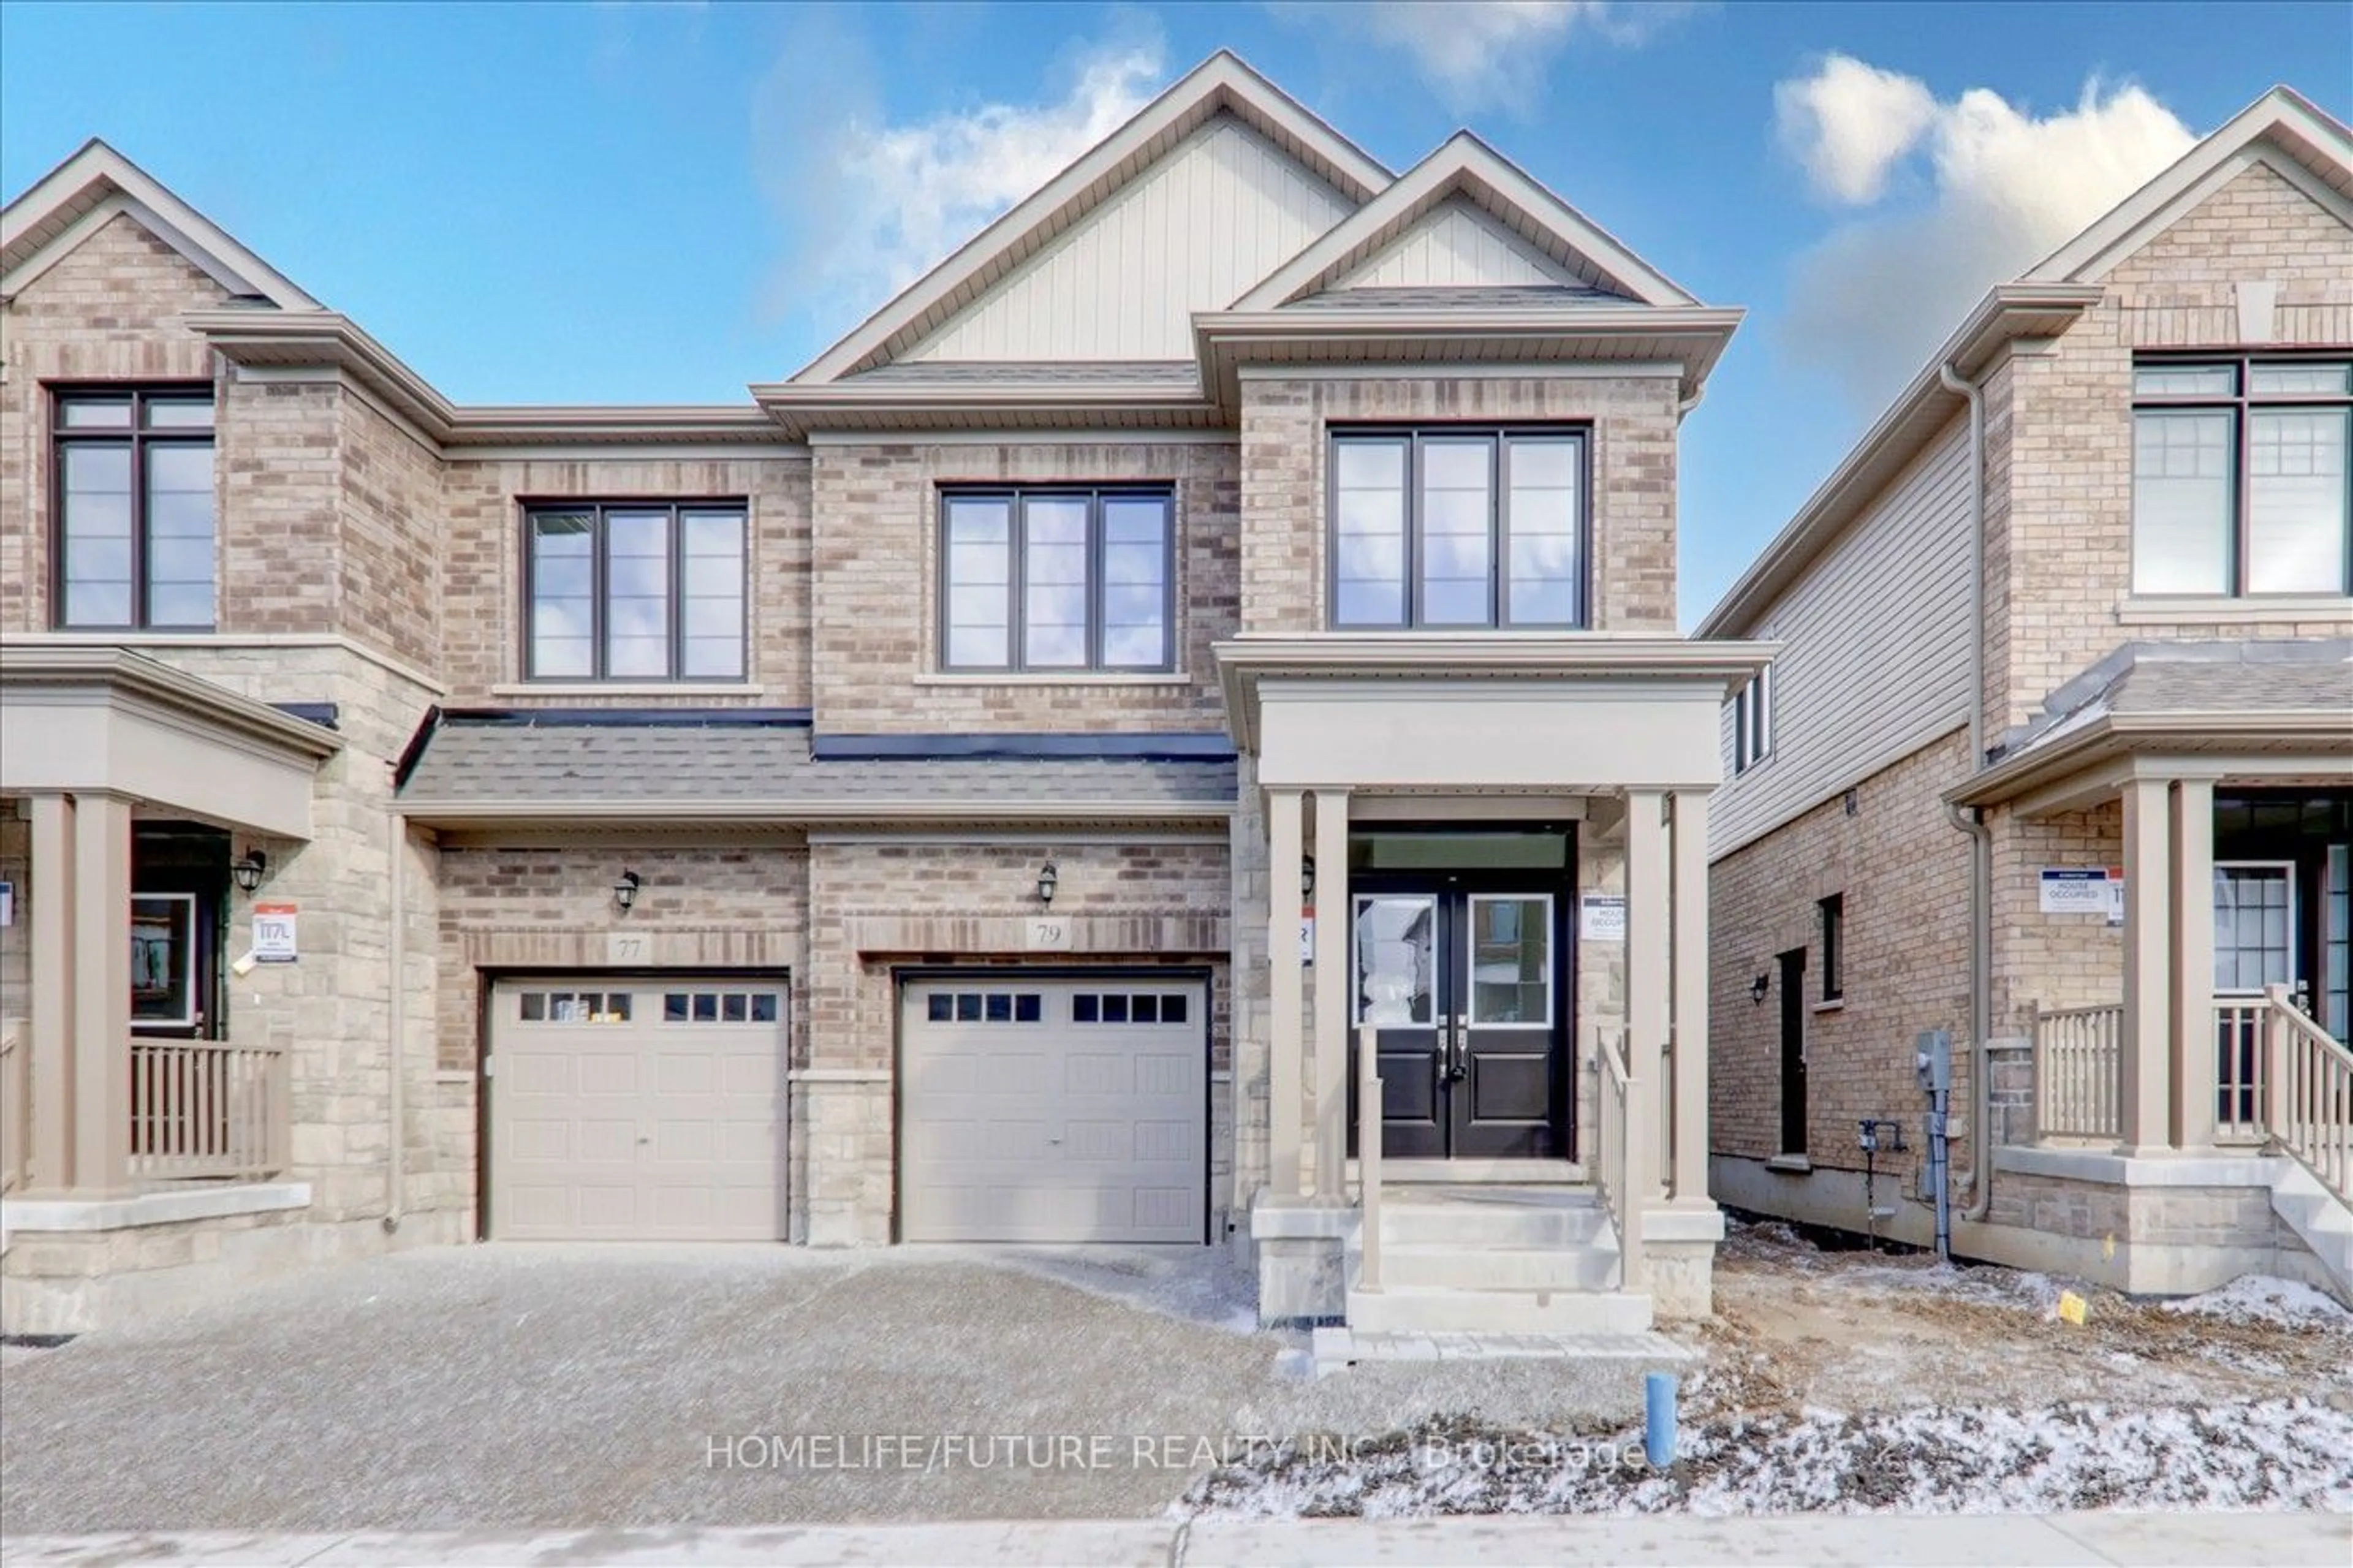 Home with brick exterior material for 79 Phoenix Blvd, Barrie Ontario L9J 0P7